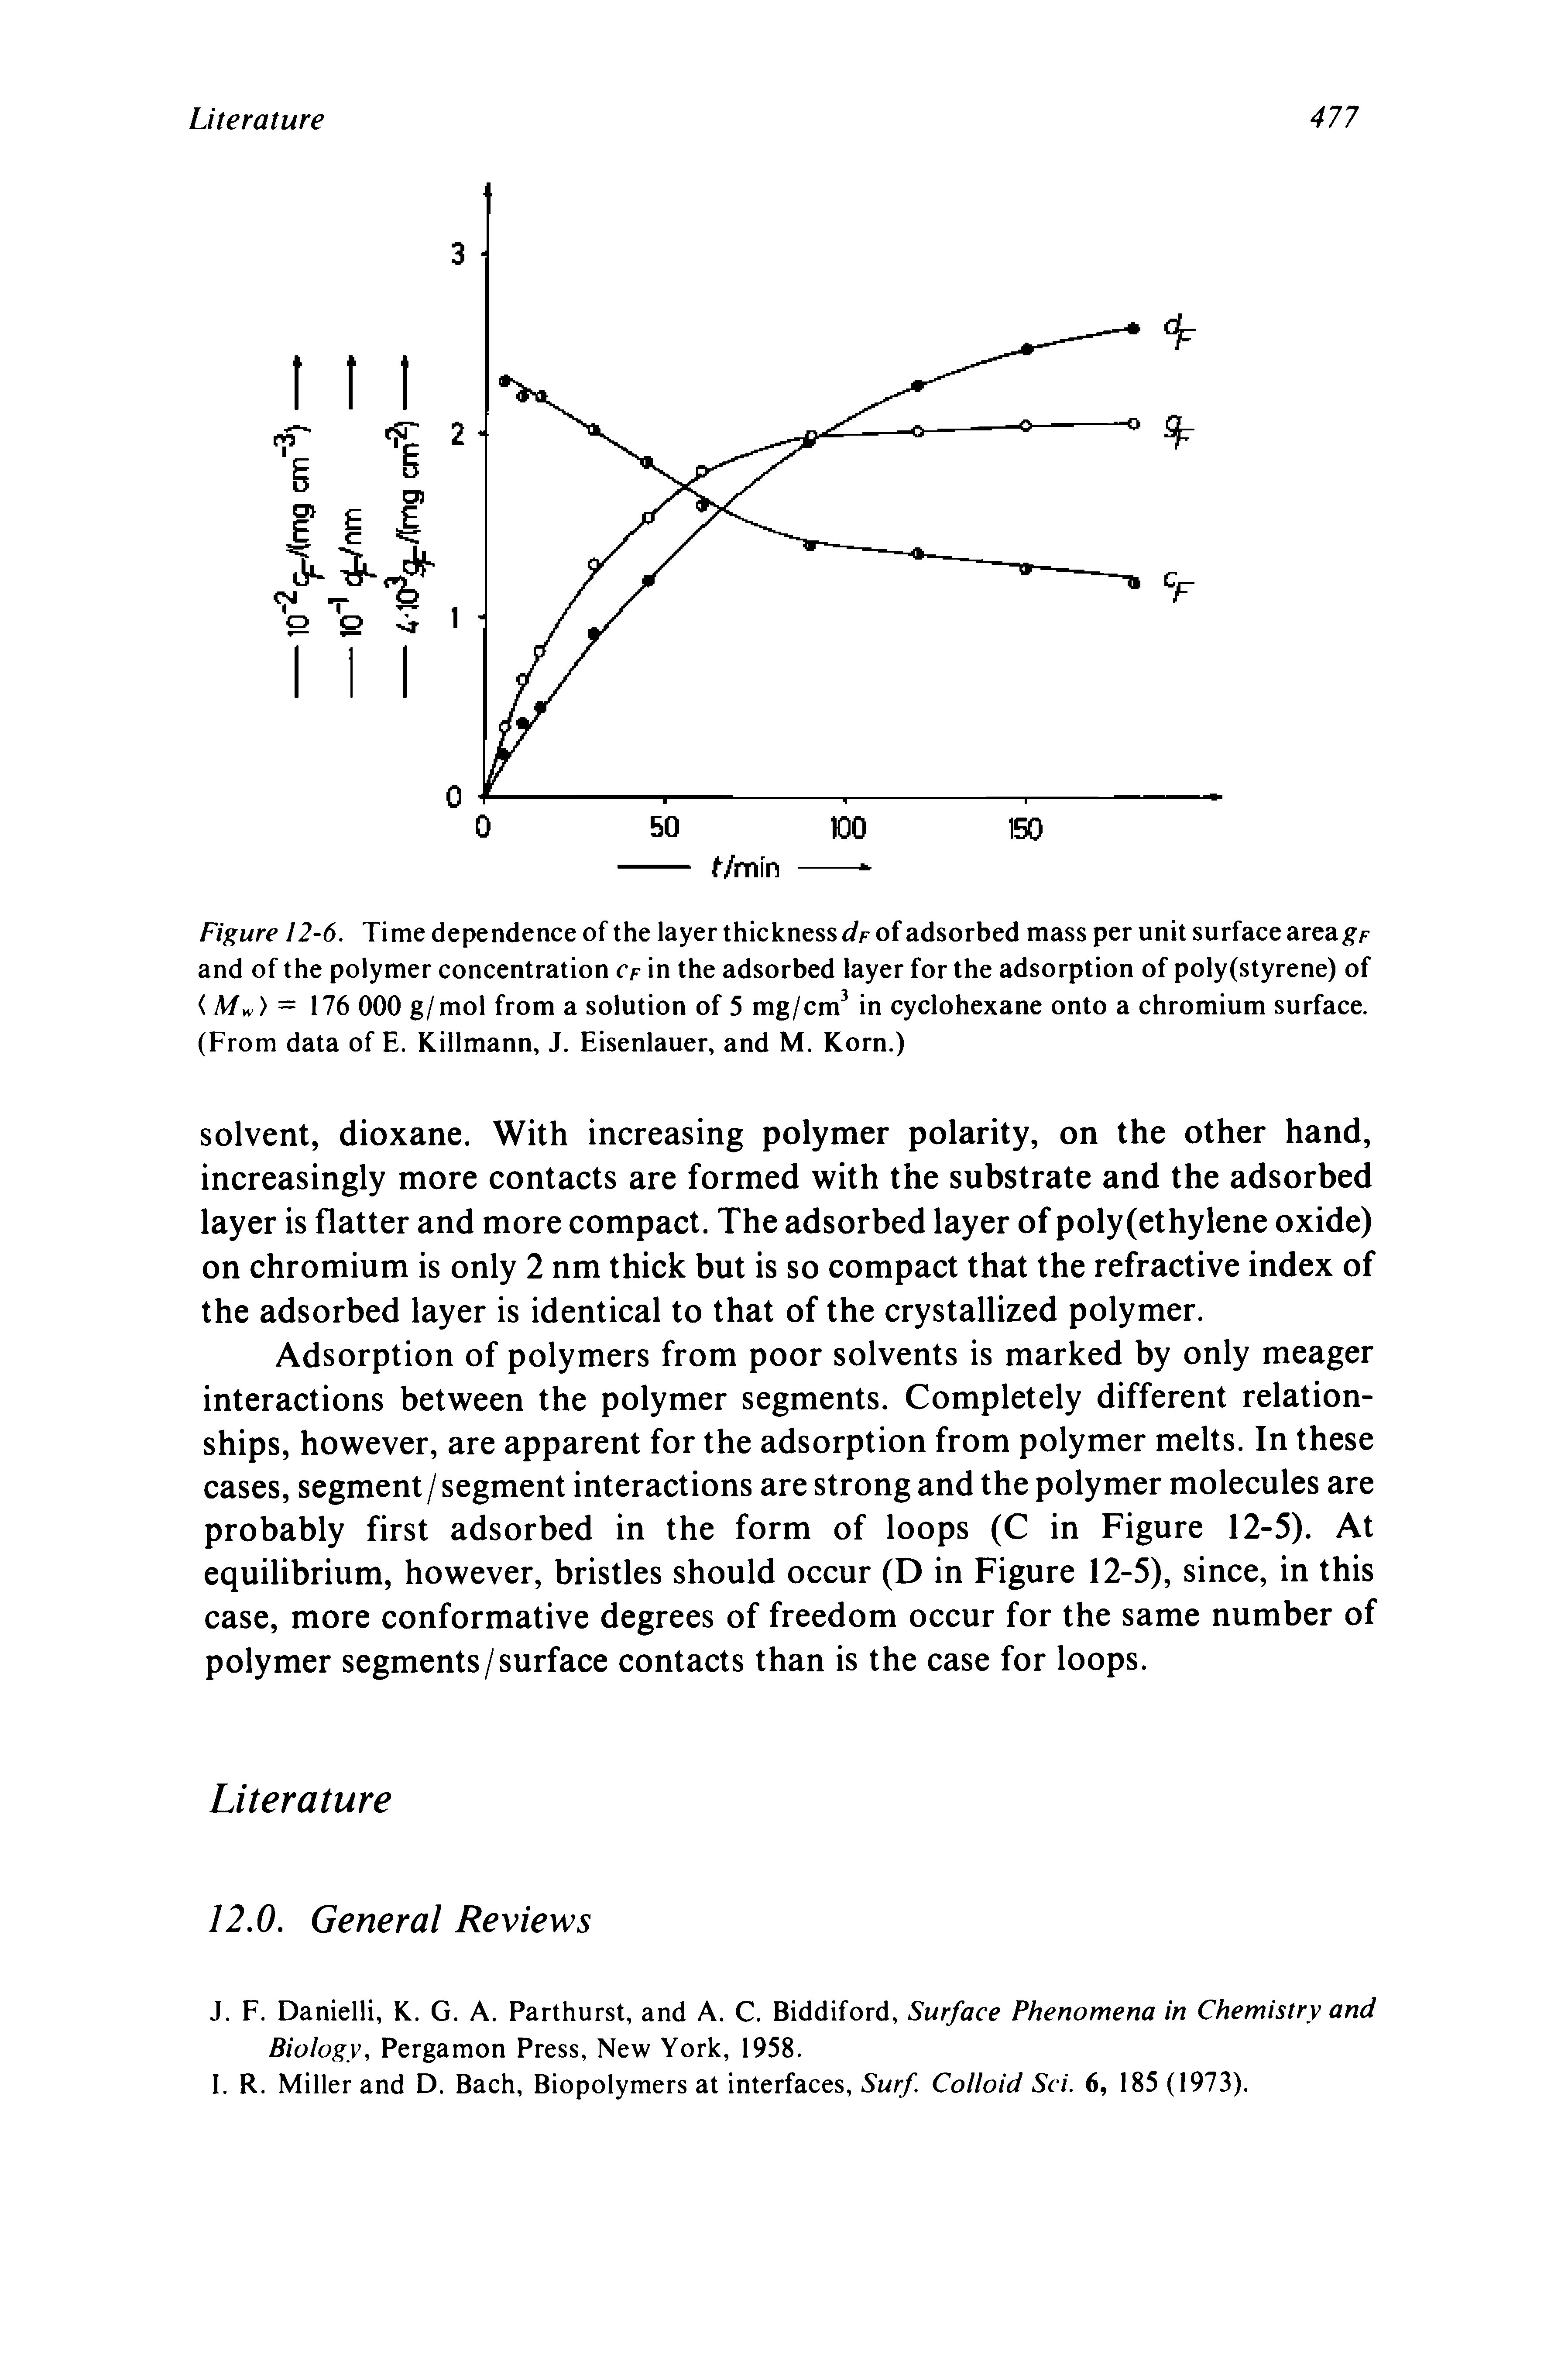 Figure 12-6. Time dependence of the layer thickness dp of adsorbed mass per unit surface area f and of the polymer concentration cf in the adsorbed layer for the adsorption of poly(styrene) of < Mvv) = 176 000 g/mol from a solution of 5 mg/crn in cyclohexane onto a chromium surface. (From data of E. Killmann, J. Eisenlauer, and M. Korn.)...